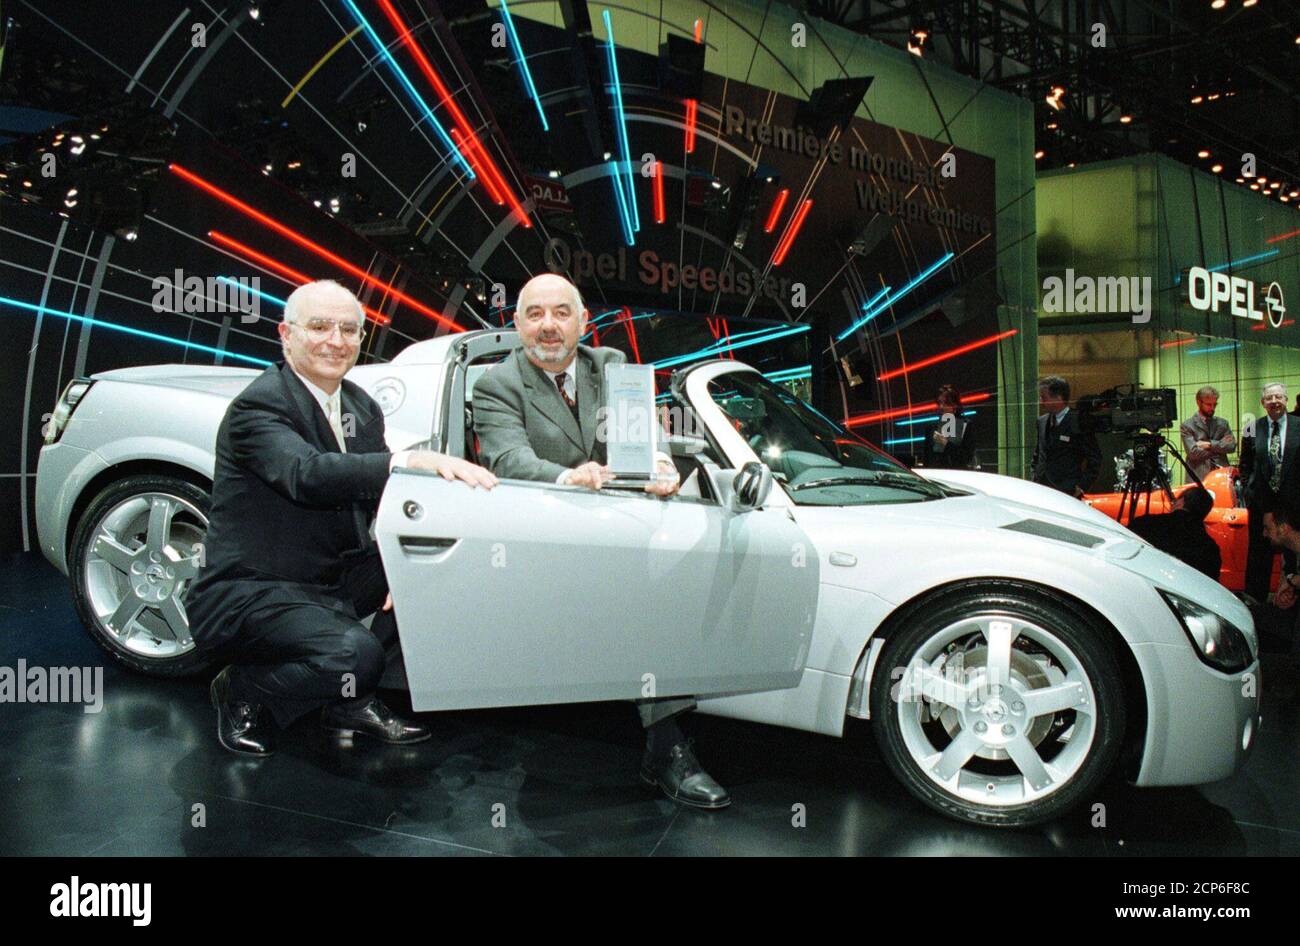 CHAIRMAN OF OPEL BOB HENDRY AND DIRECTOR OF OPEL SWITZERLAND ARMIN GROND  POSE WITH THE CABRIO OF THE YEAR. Chairman of Opel Bob Hendry (L) and  Director of Opel Switzerland Armin Grond (